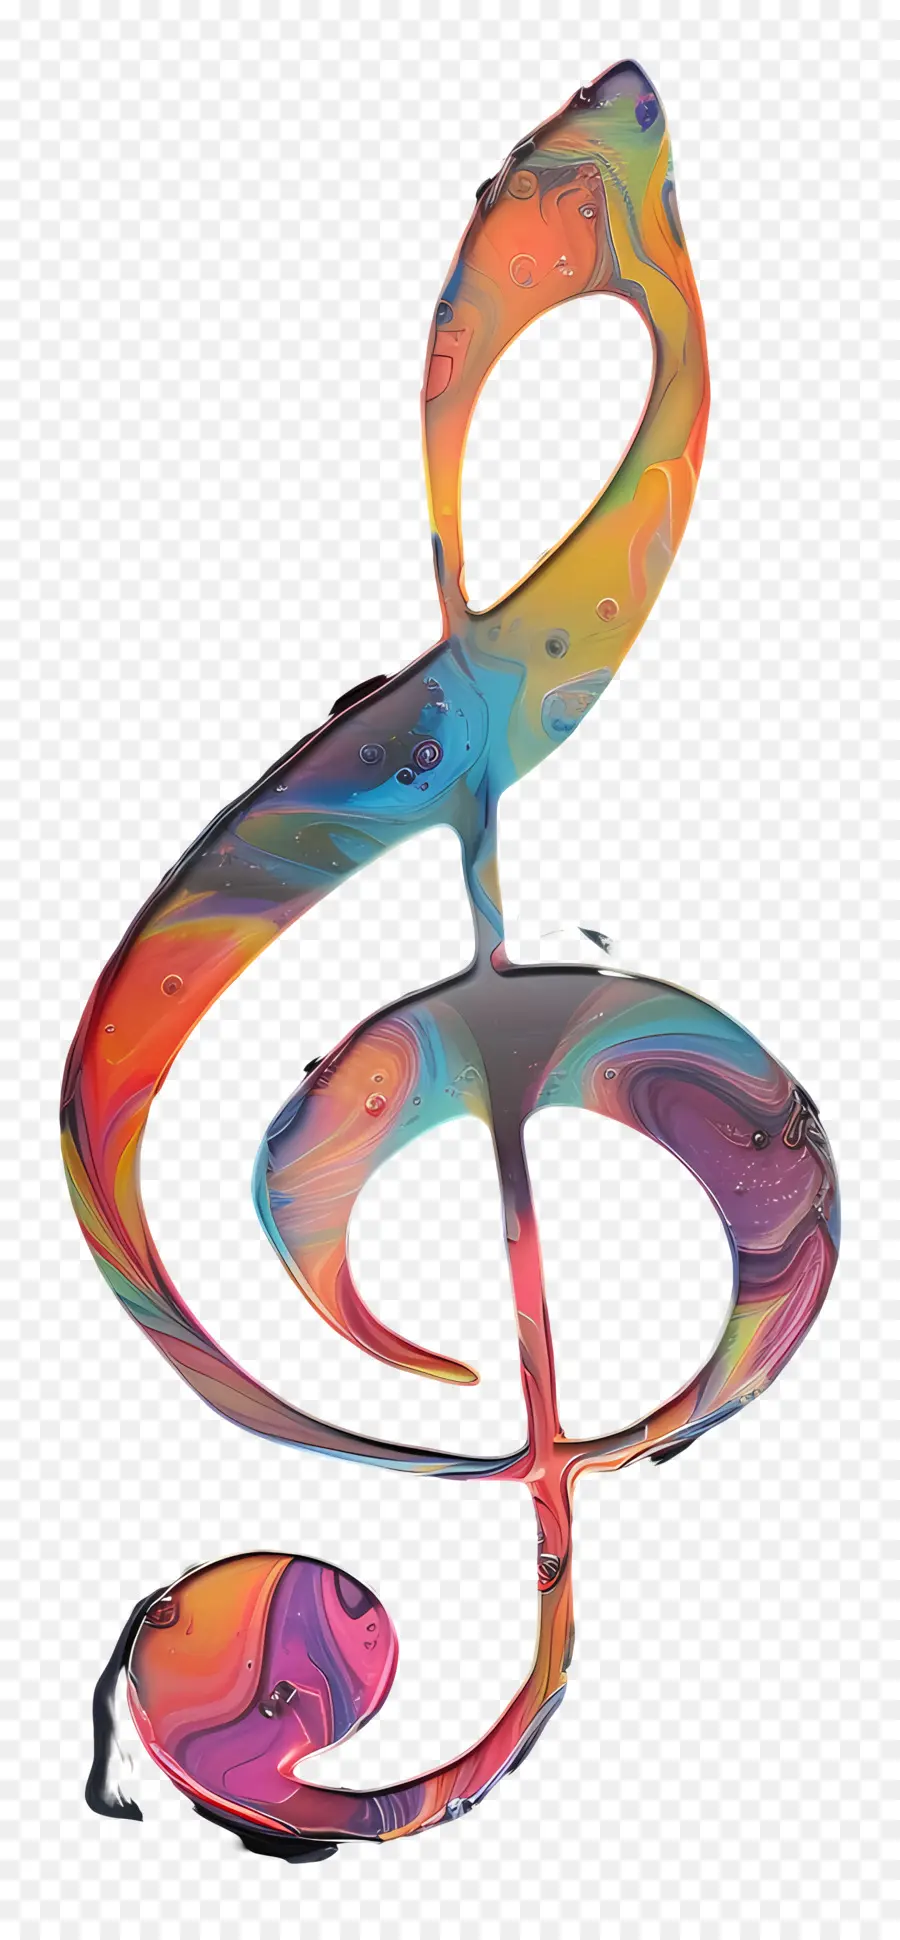 iridescence music musical note c sharp colorful